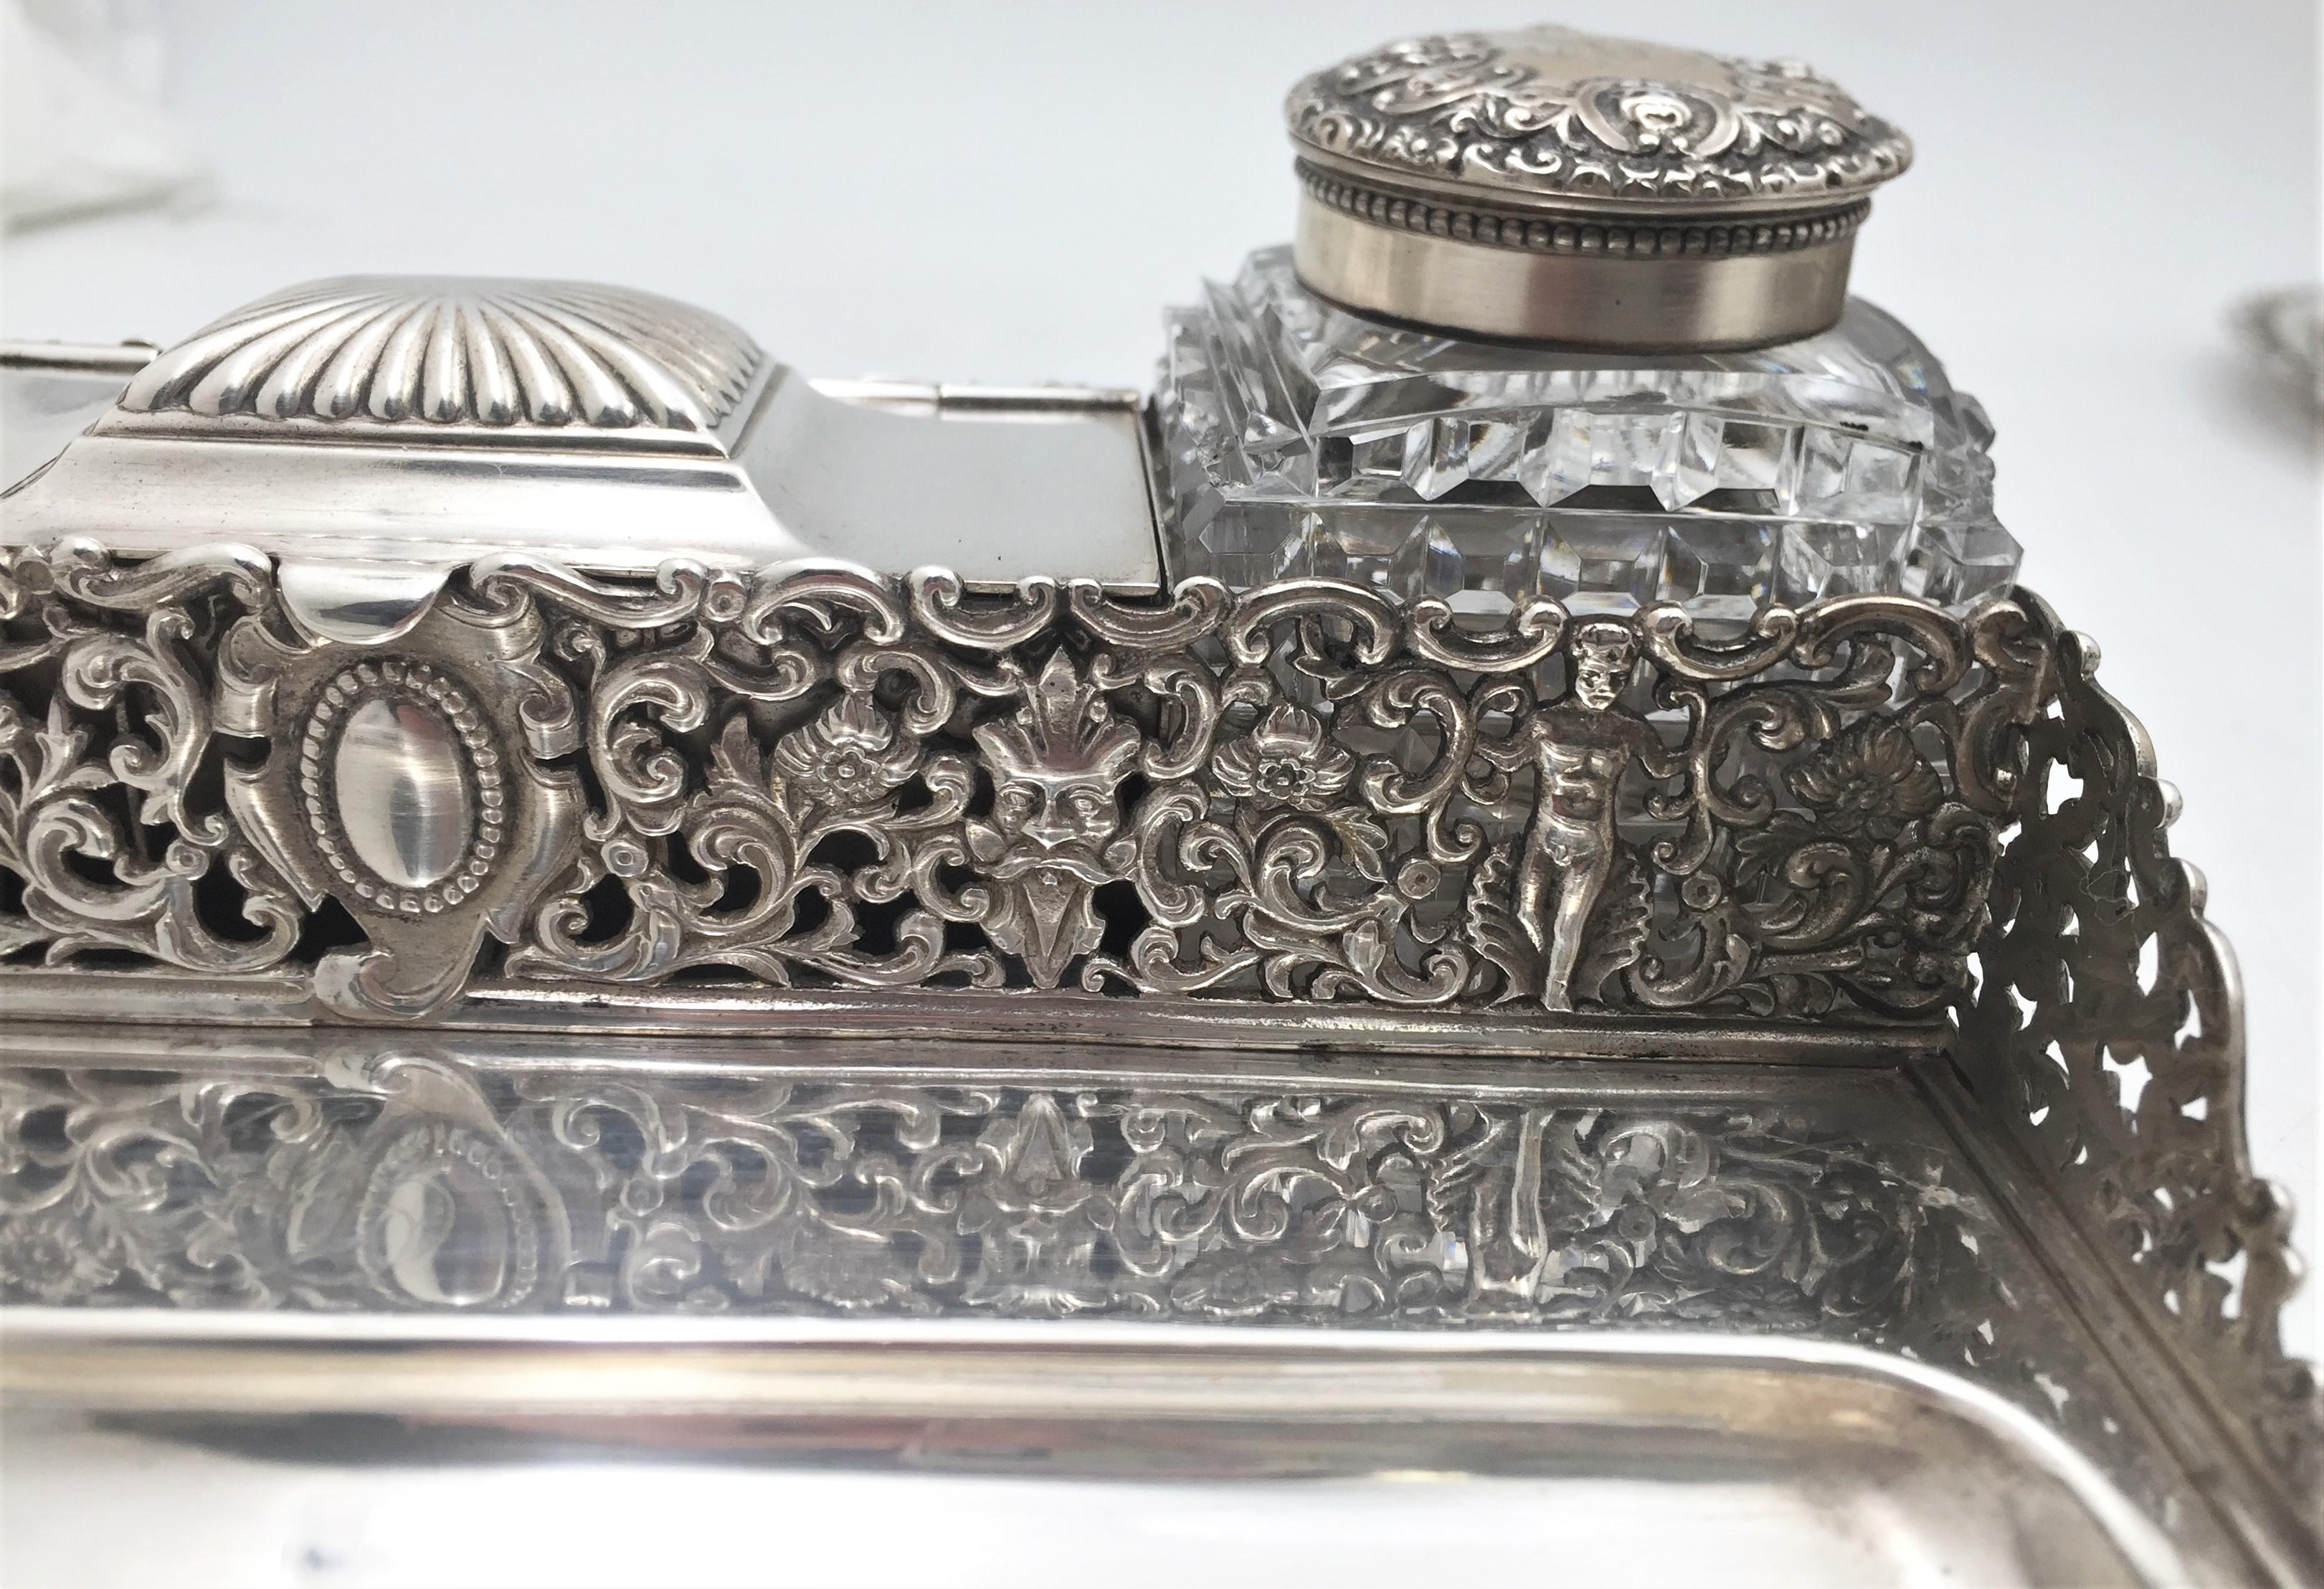 Gorham sterling silver tabletop double inkwell from 1886 with intricately pierced figural gallery. It contains two glass inkwells with sterling silver caps and has an open compartment with hinged door. A great gift and addition to one's home or